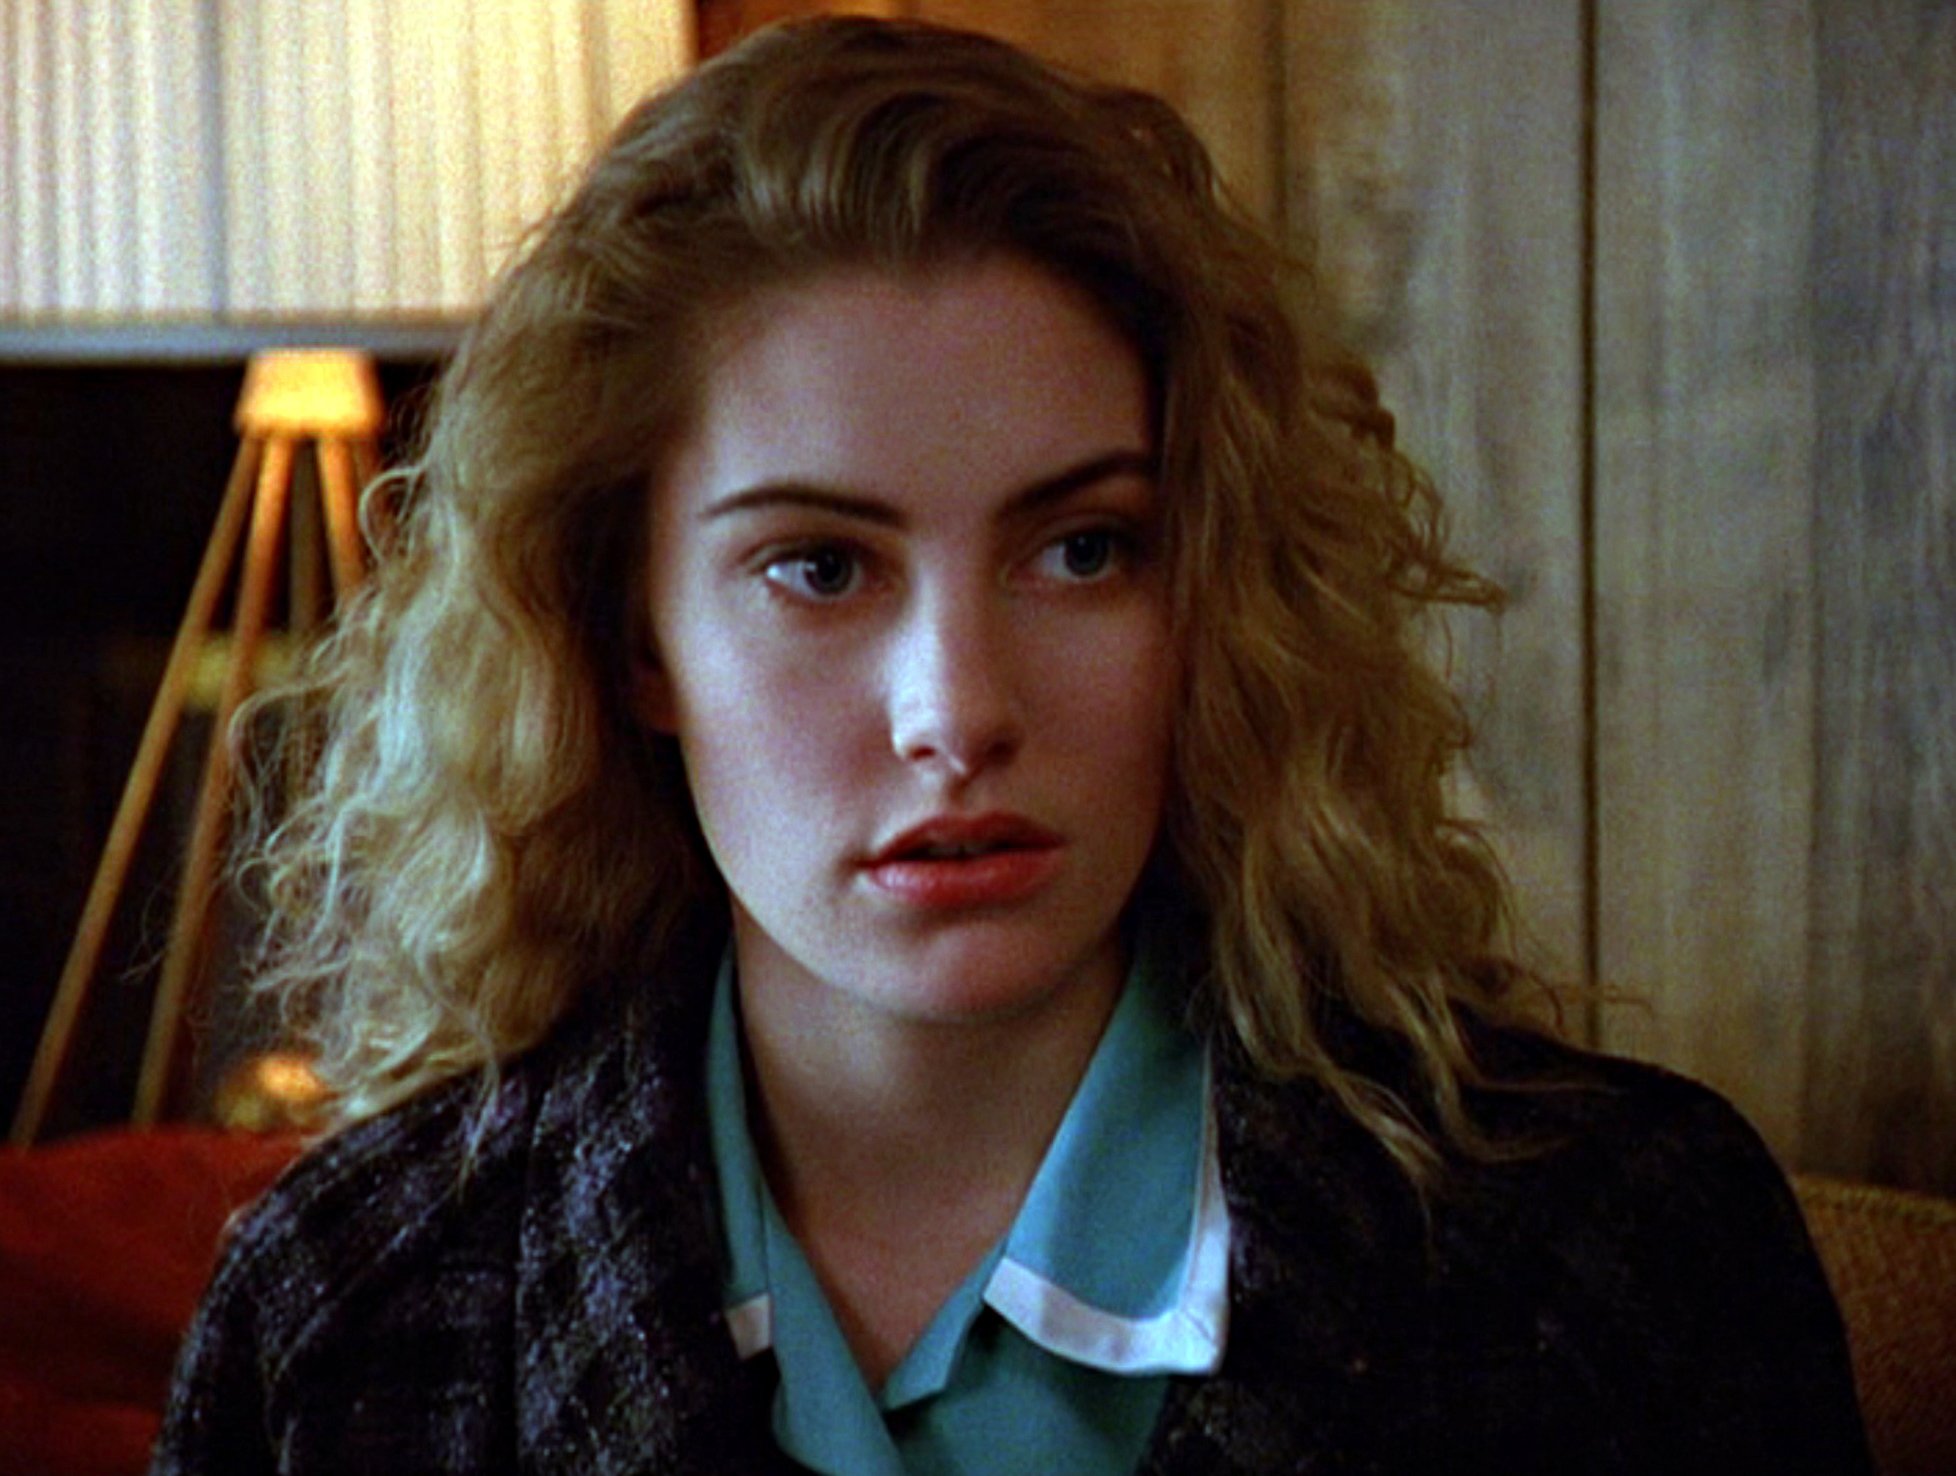 Madchen Amick as Shelly in 'Twin Peaks'